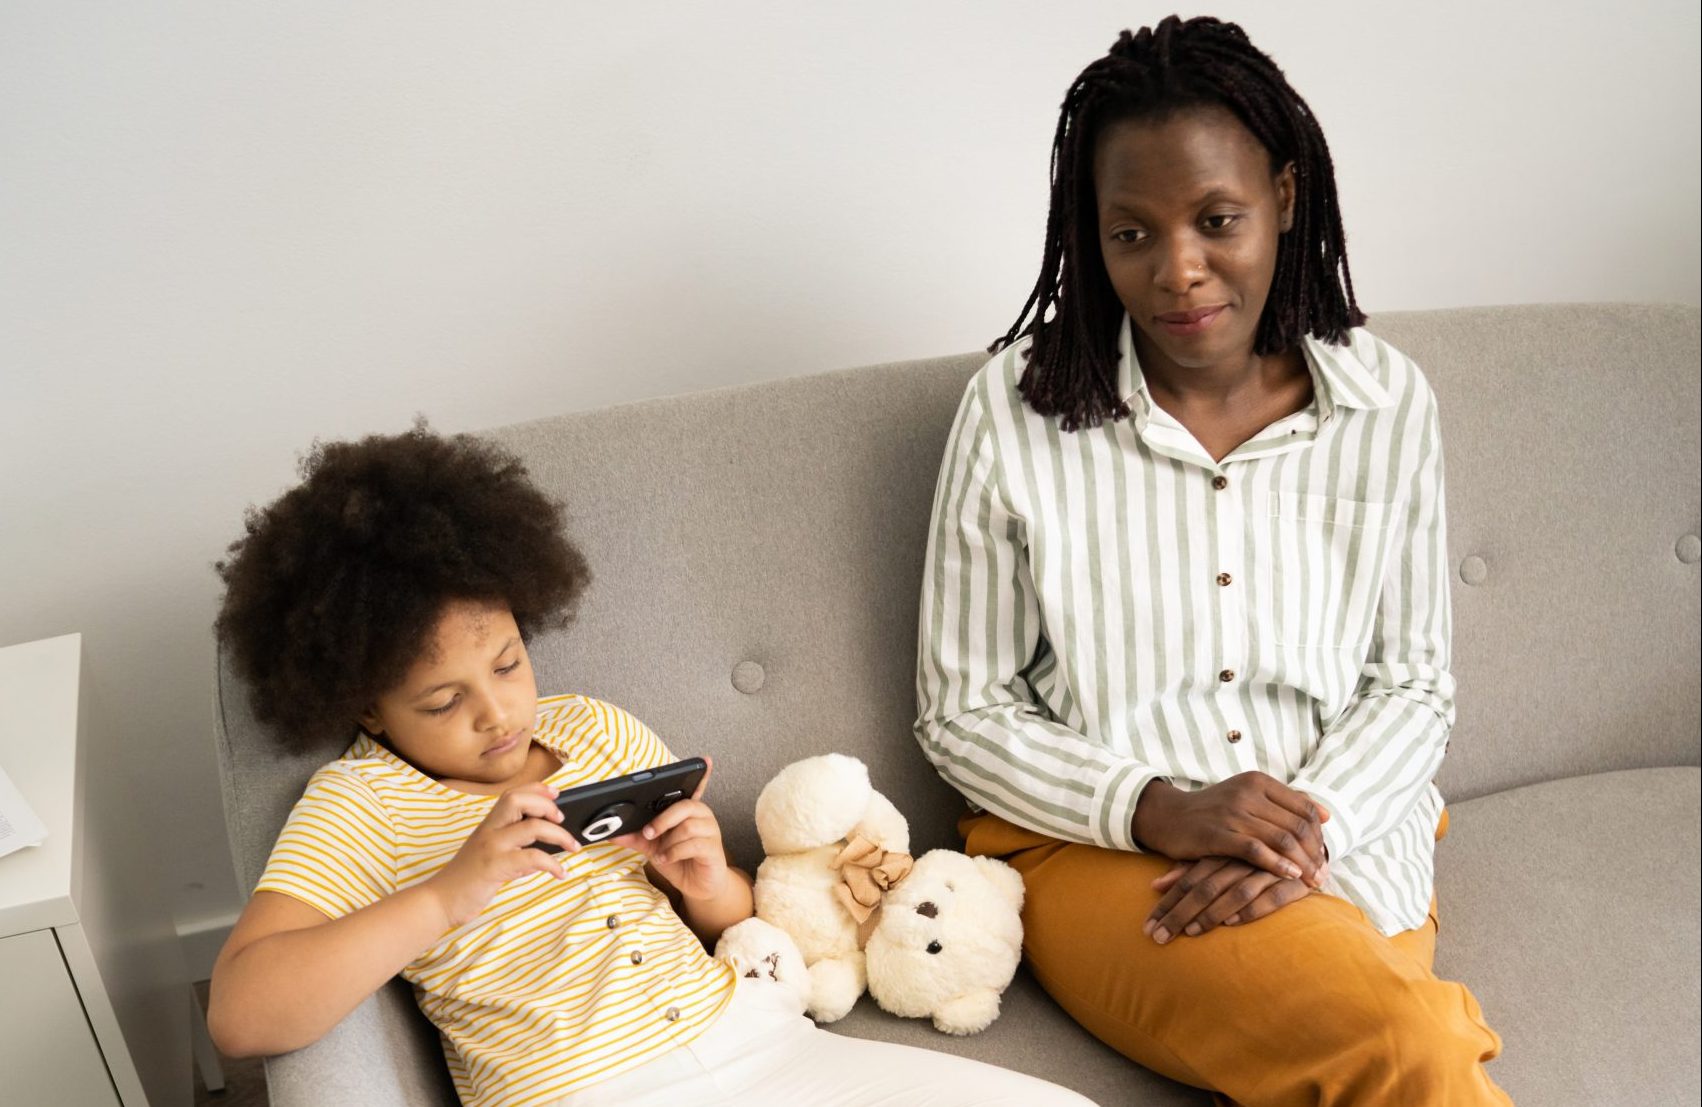 Mom and daughter meeting with counselor at home, while daughter is looking at a handheld screen